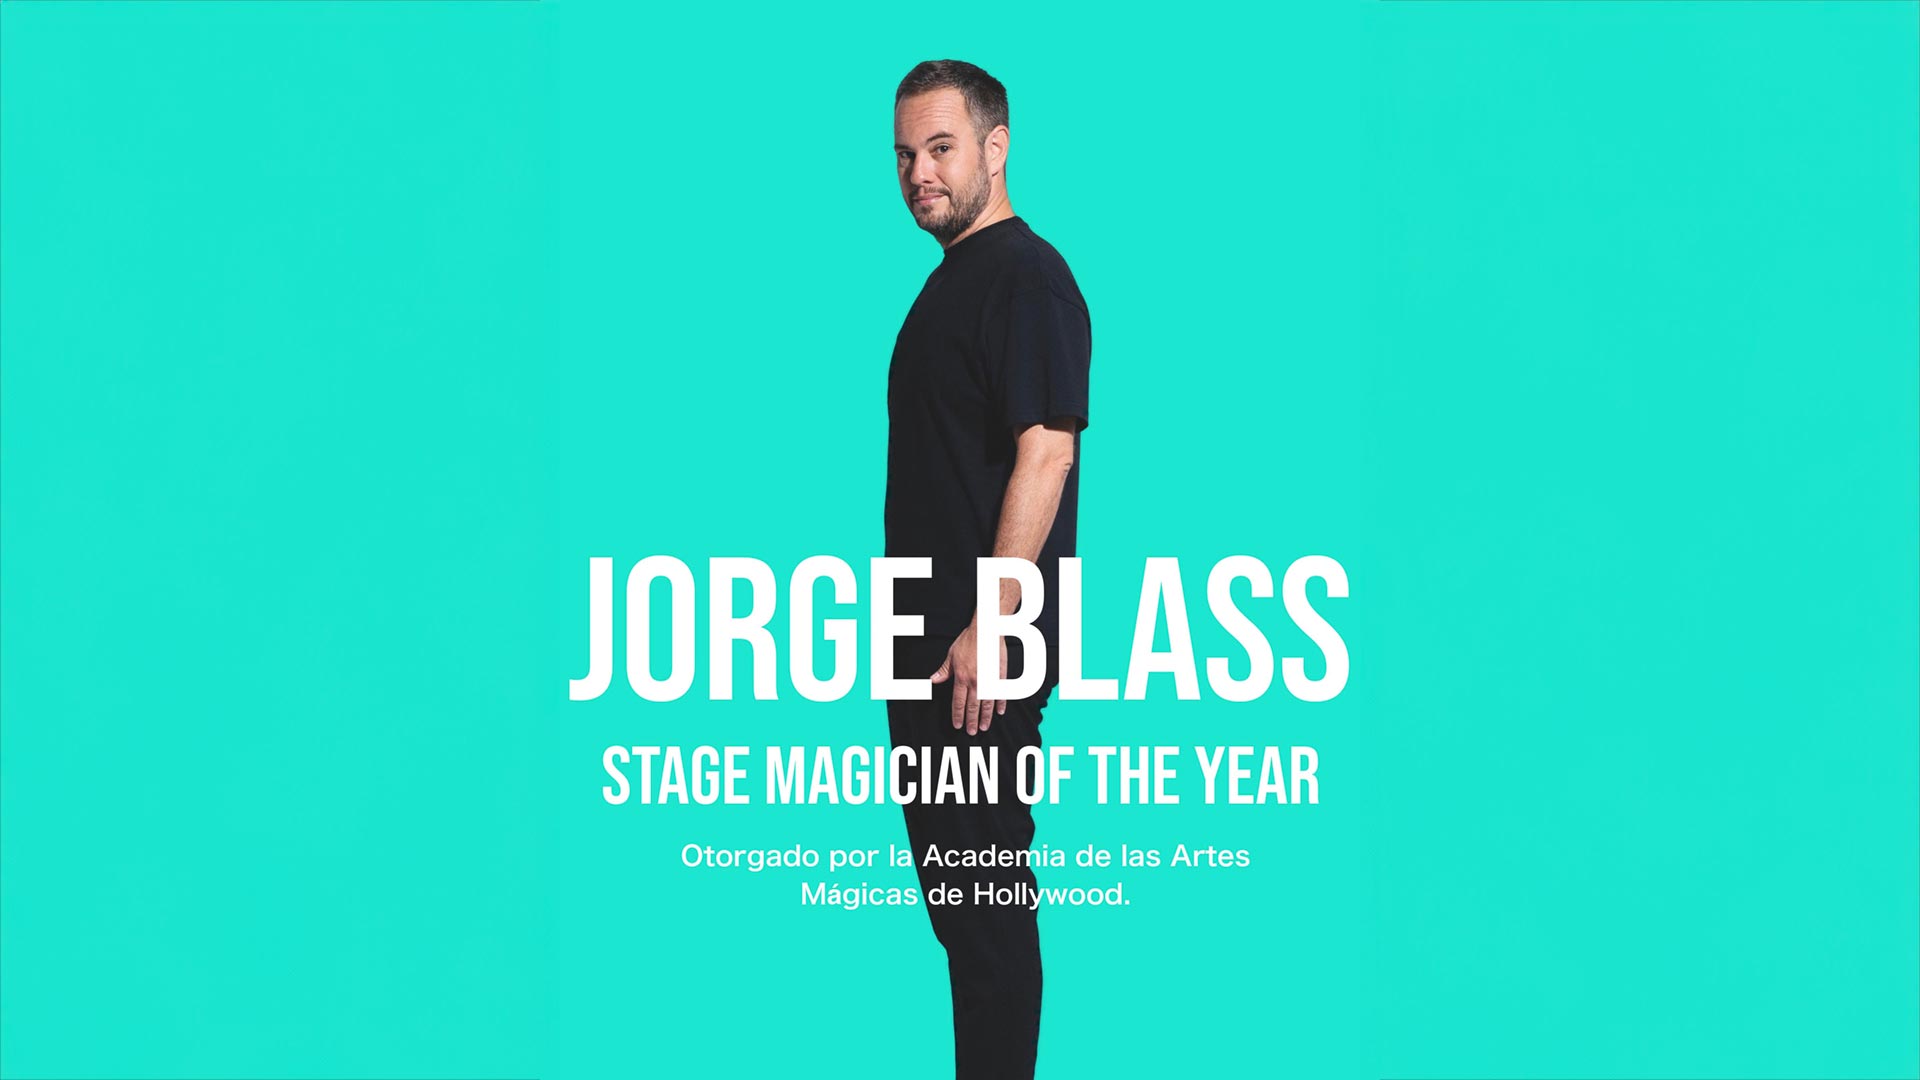 Jorge Blass. Stage Magician Of The Year